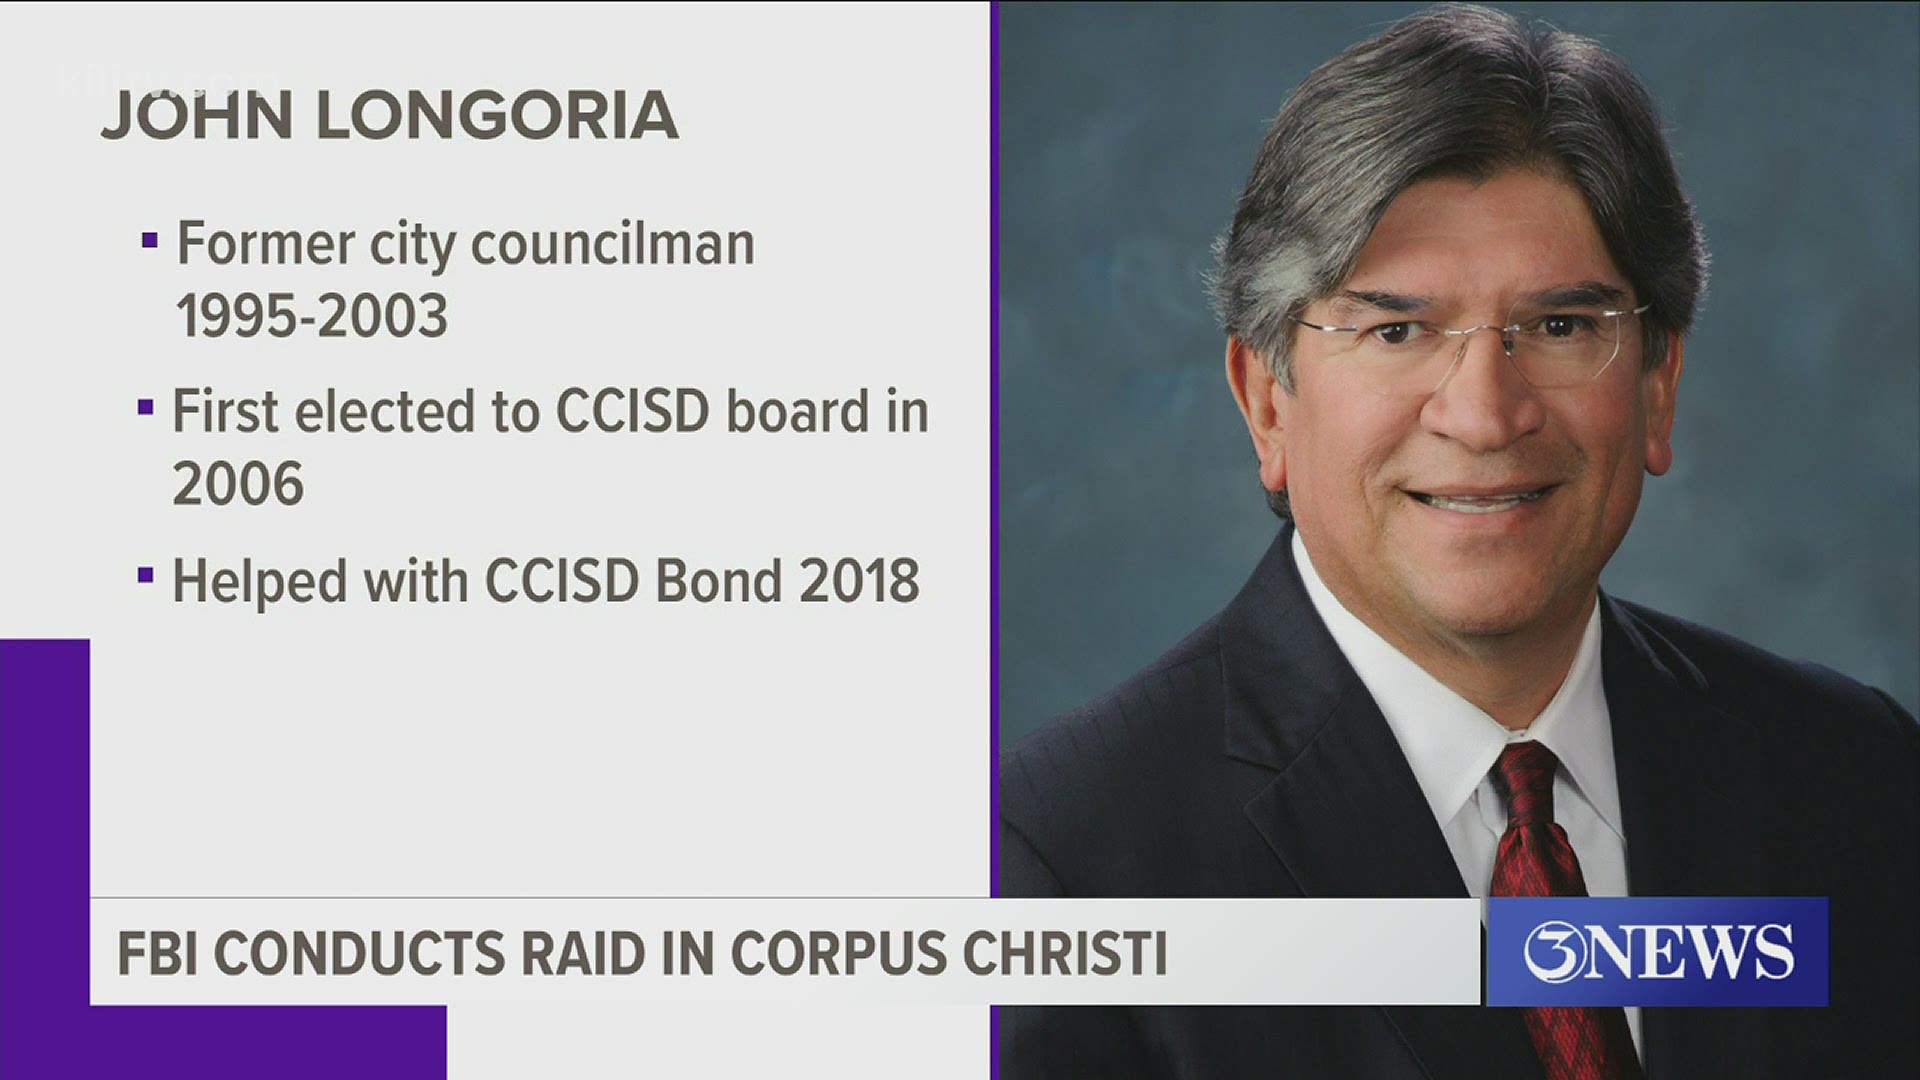 The member being asked to resign is CCISD board member John Longoria whose residence was raided by the FBI on Tuesday, November 10.